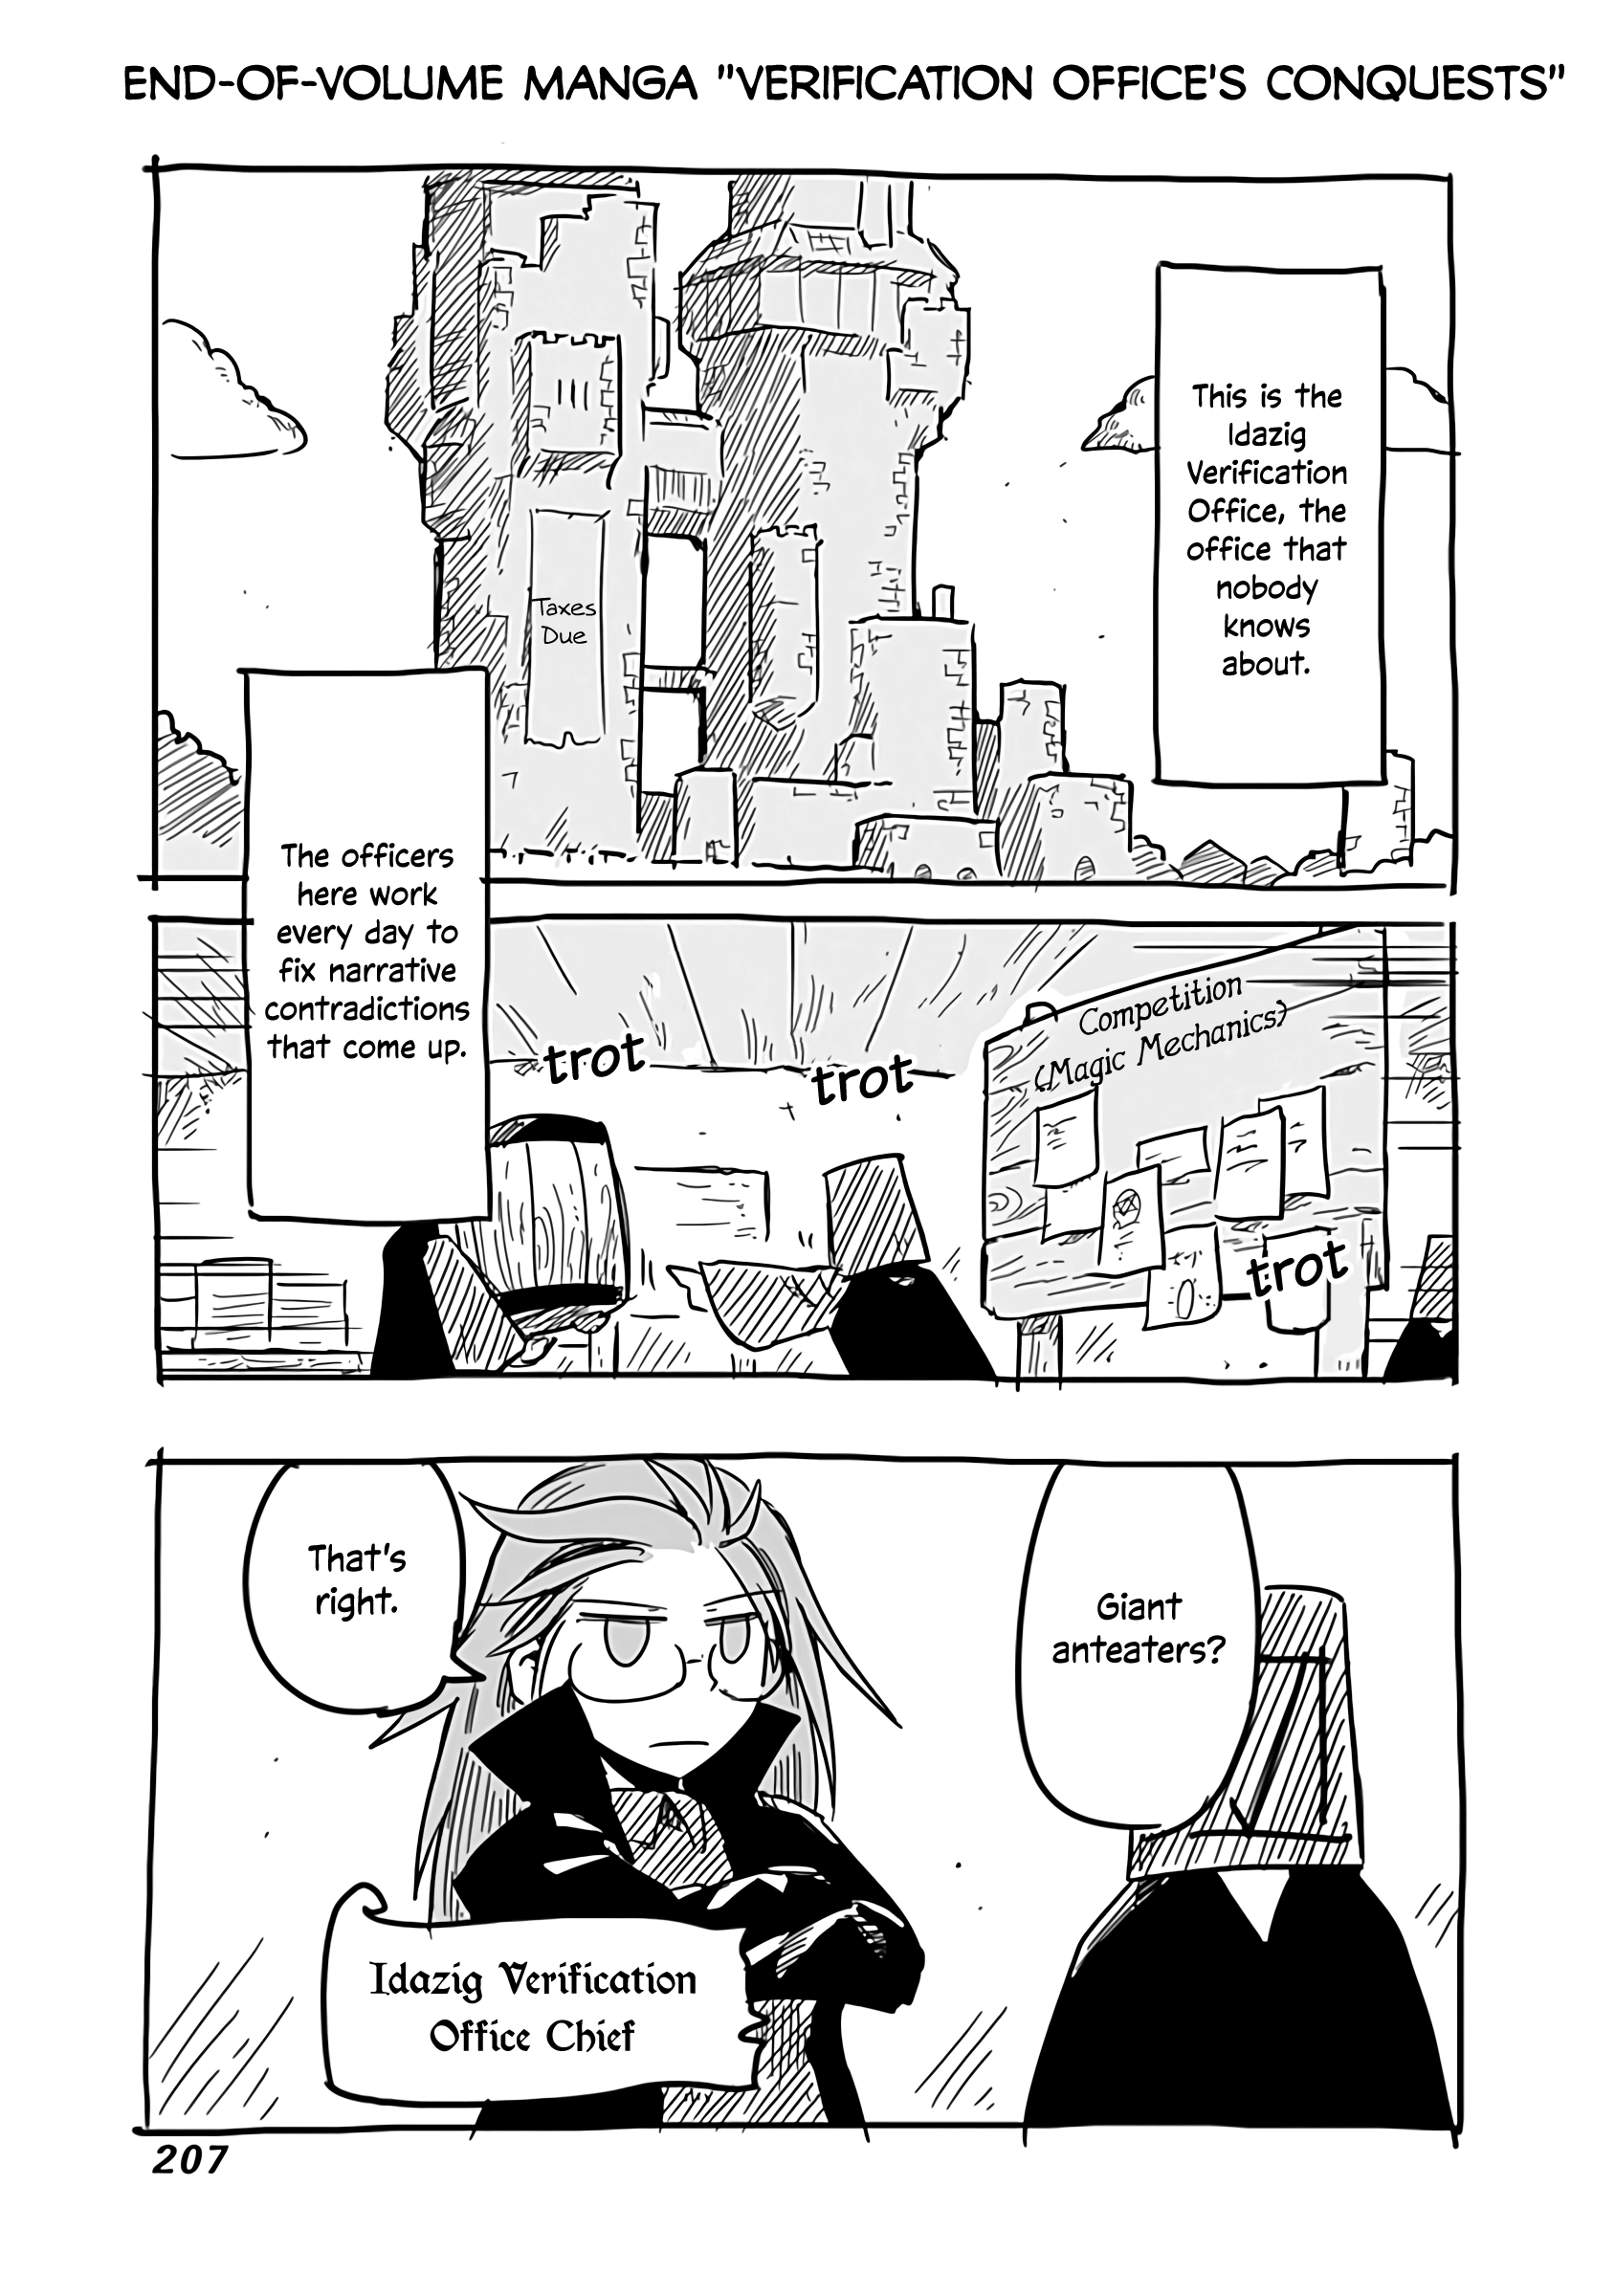 The Dragon, The Hero, And The Courier Vol.4 Chapter 26.5: Verification Office's Conquests - Picture 2